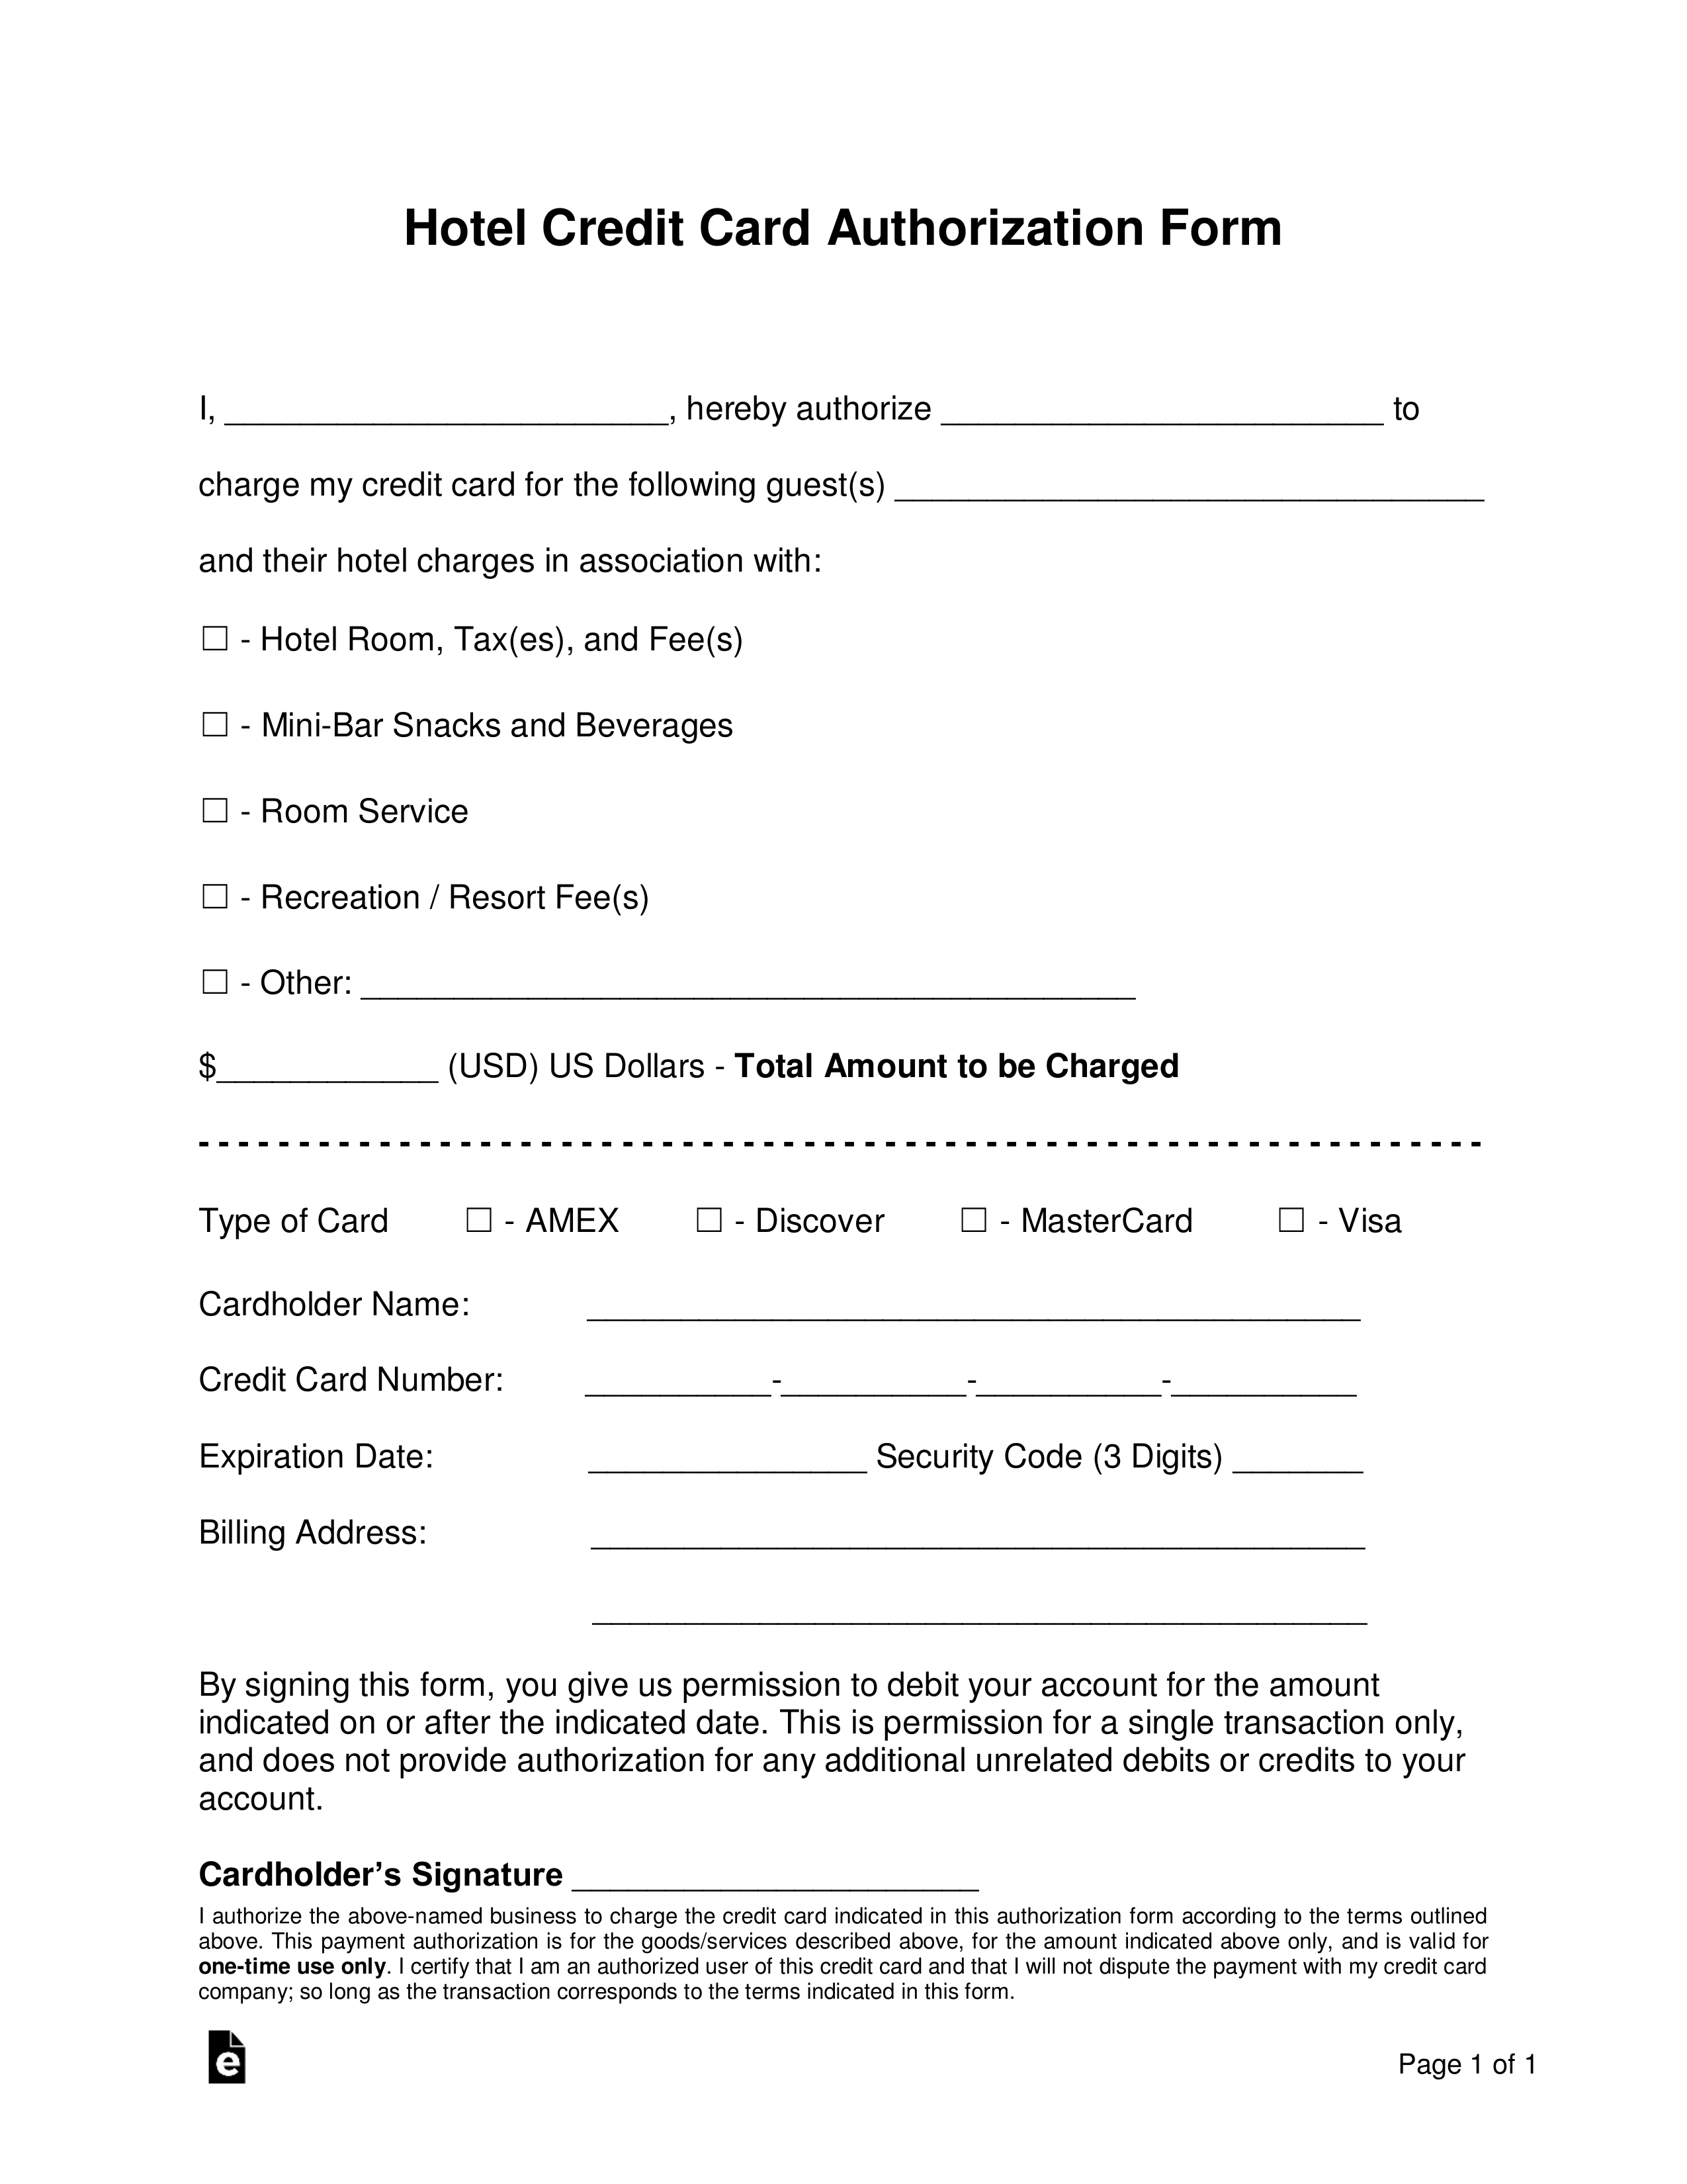 air india credit card authorization letter In Credit Card Billing Authorization Form Template